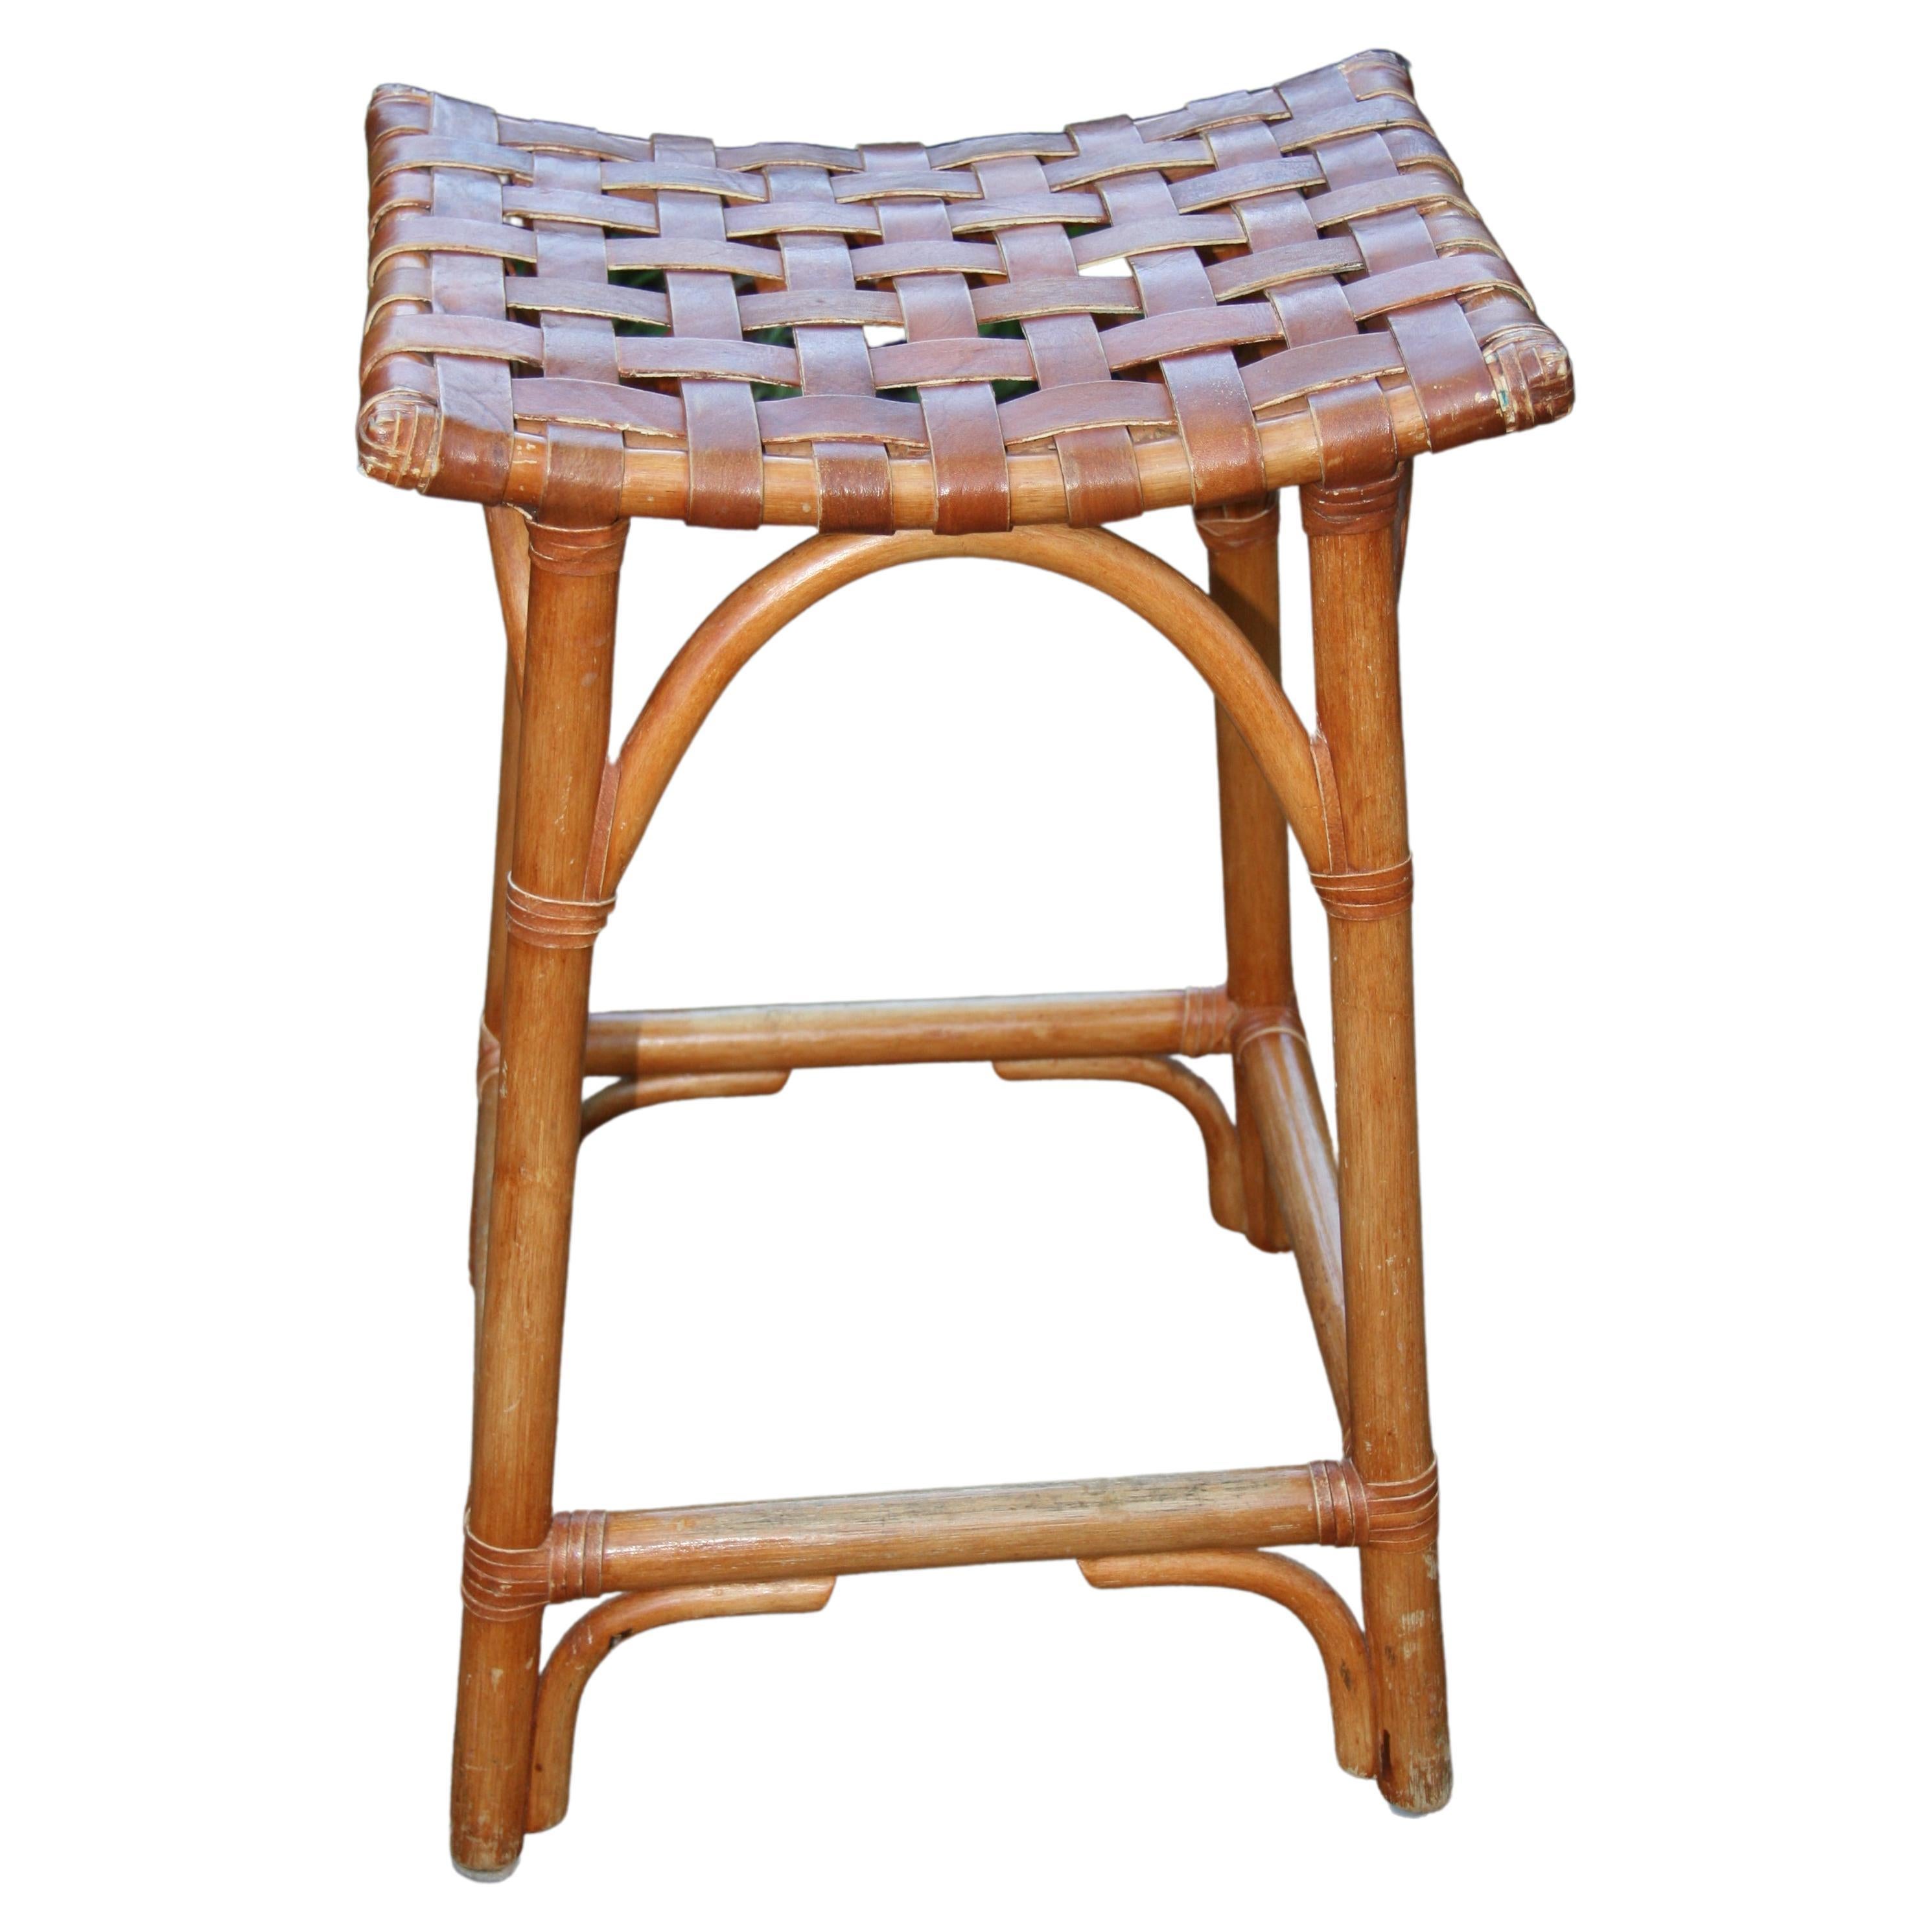 French Leather Strap and Rattan Stool / Side Table